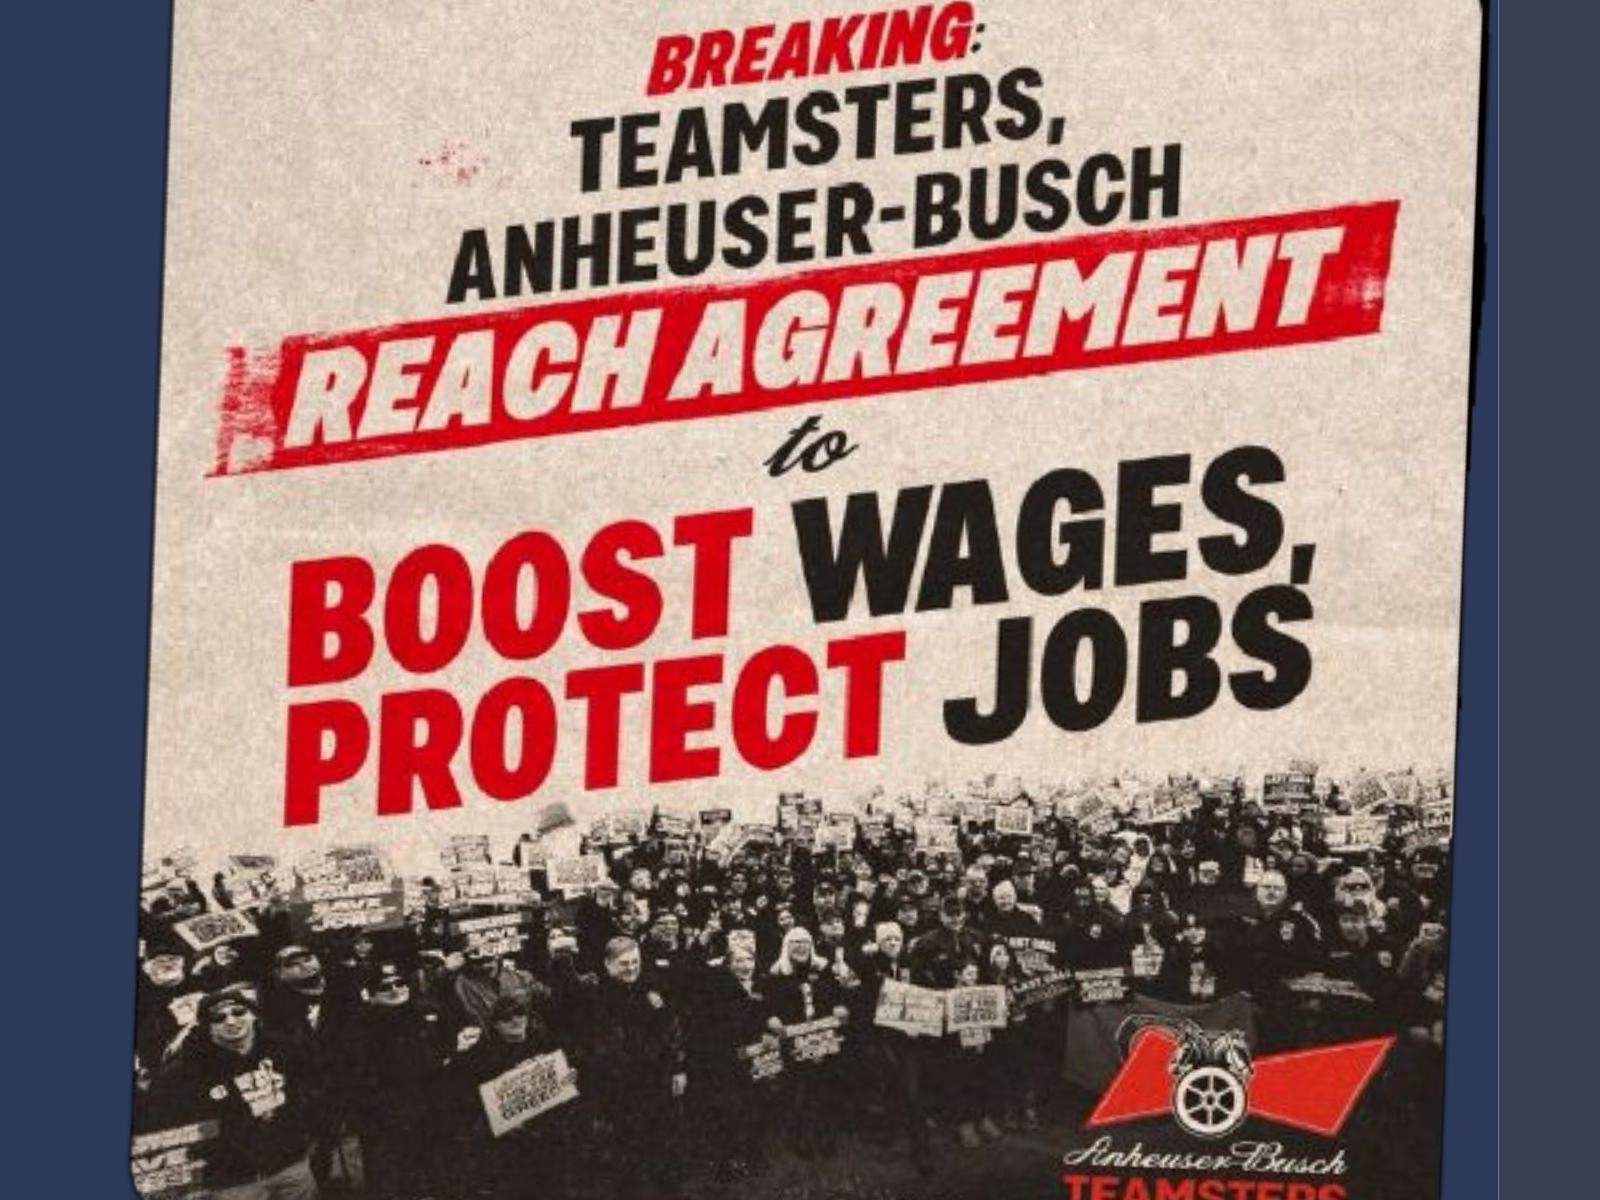 Just In: The Teamsters at Anheuser-Busch Have a Tentative Agreement!